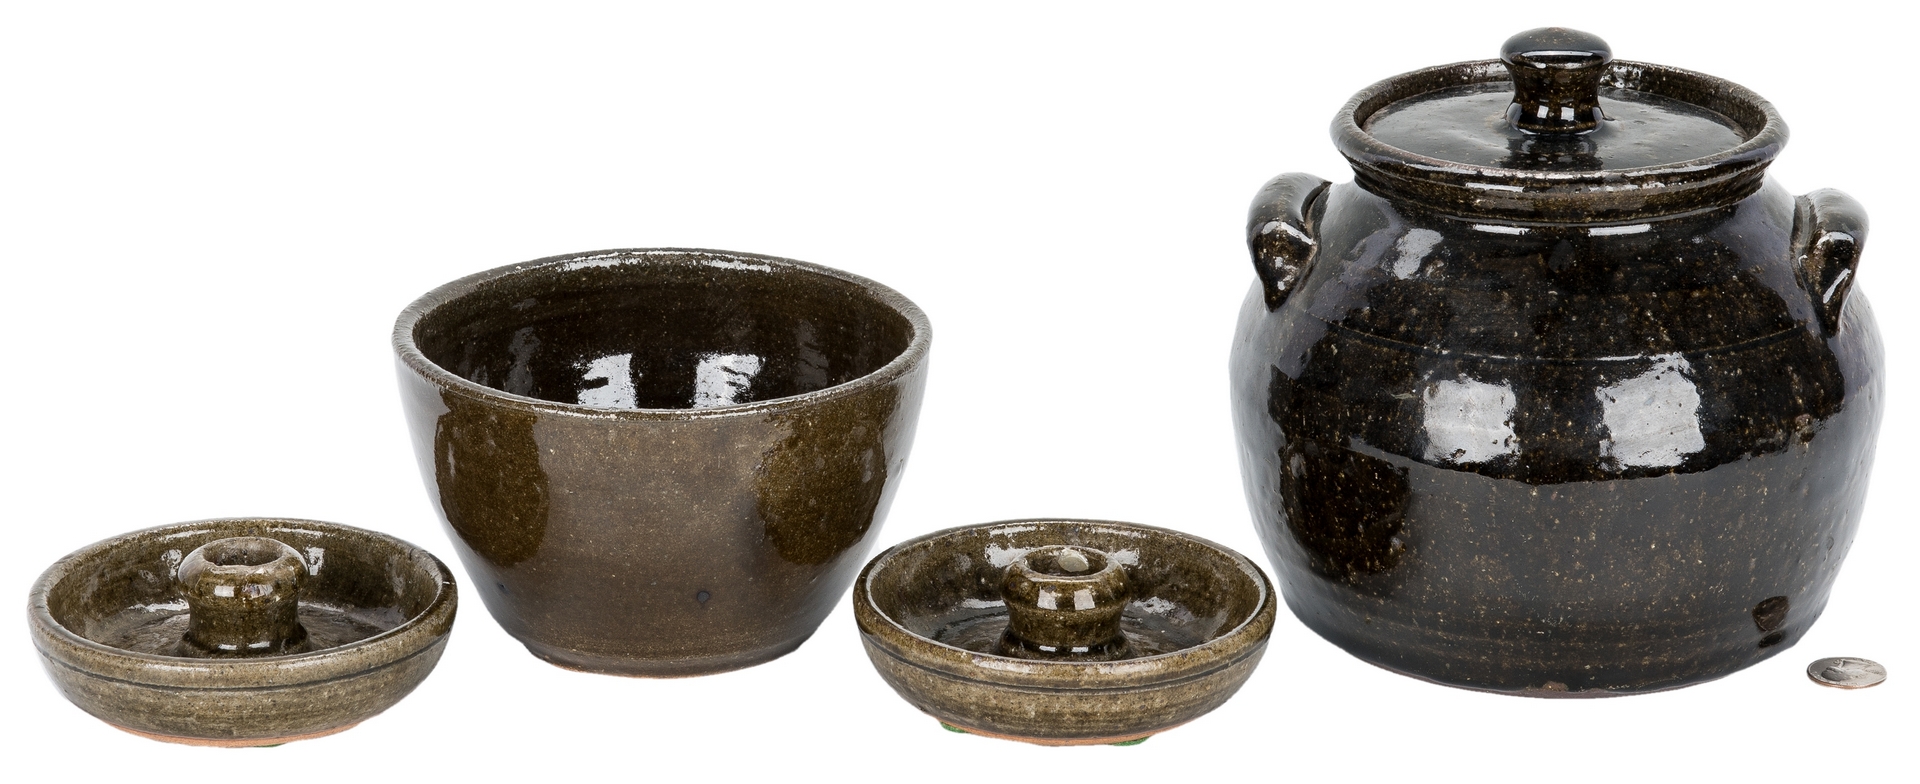 Lot 393: 4 Pcs. Lanier Meaders & Arie Meaders Pottery